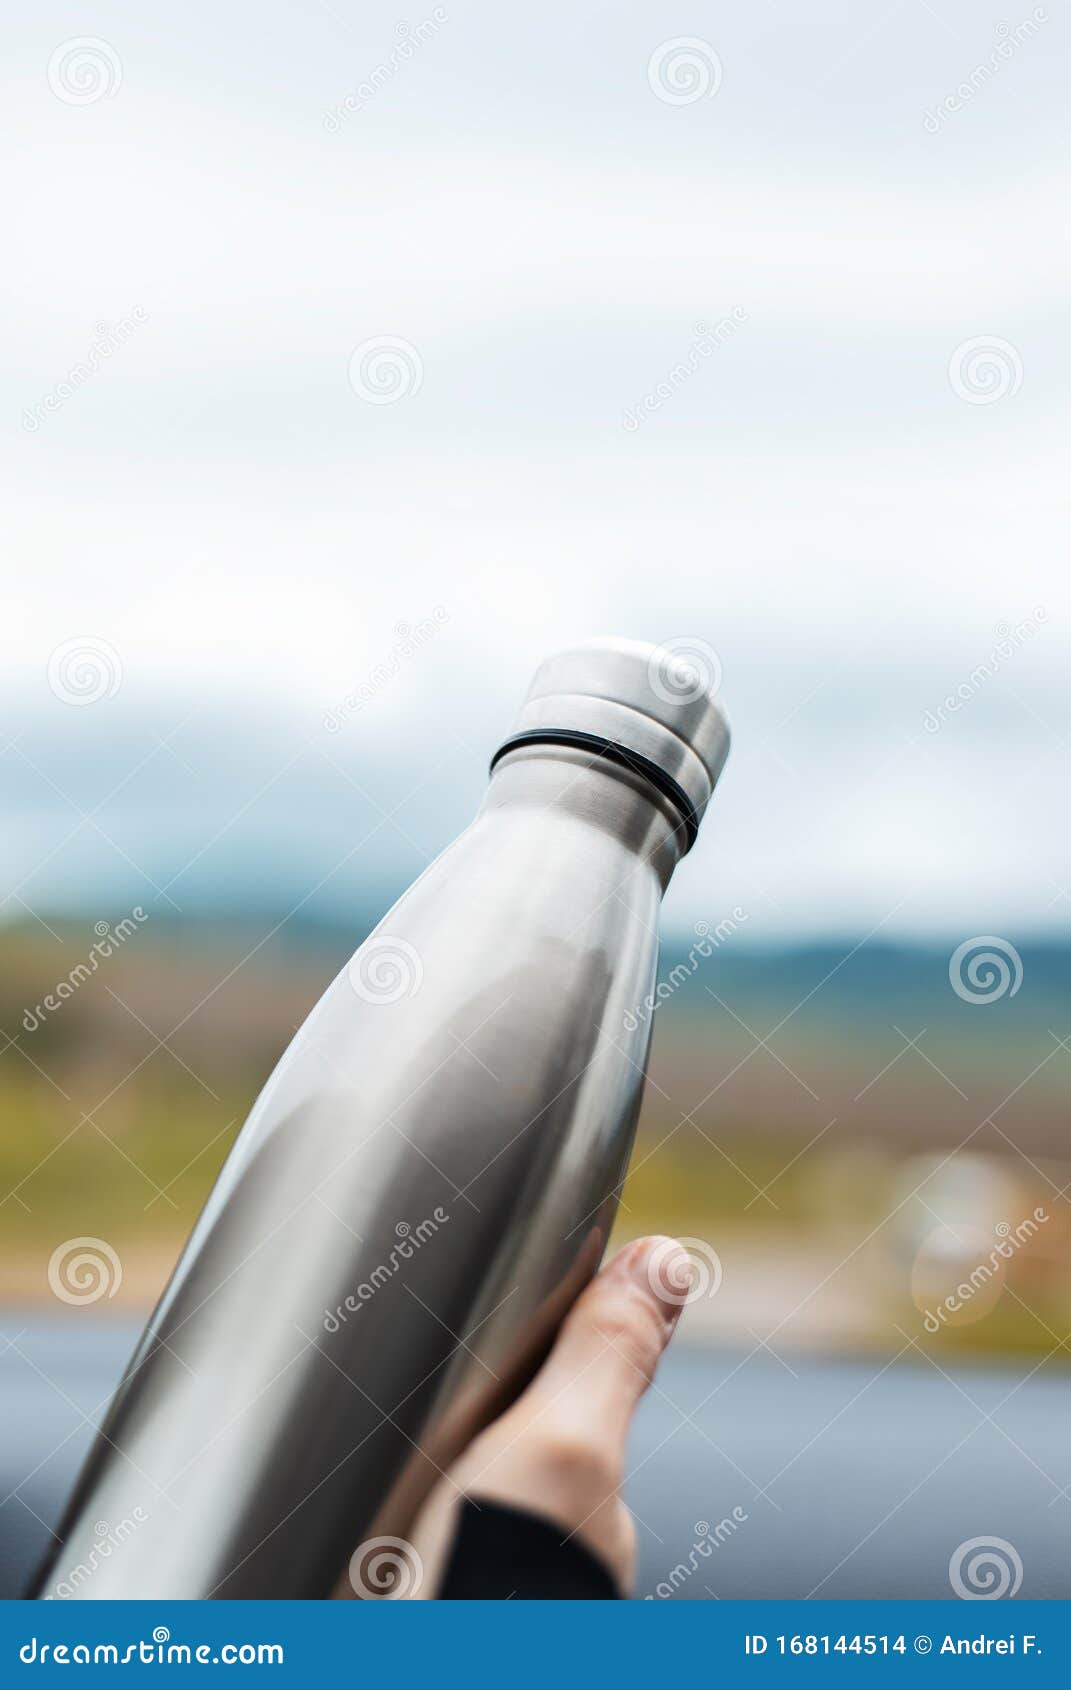 close-up of female hand holding a steel reusable thermal water bottle on background of sky.